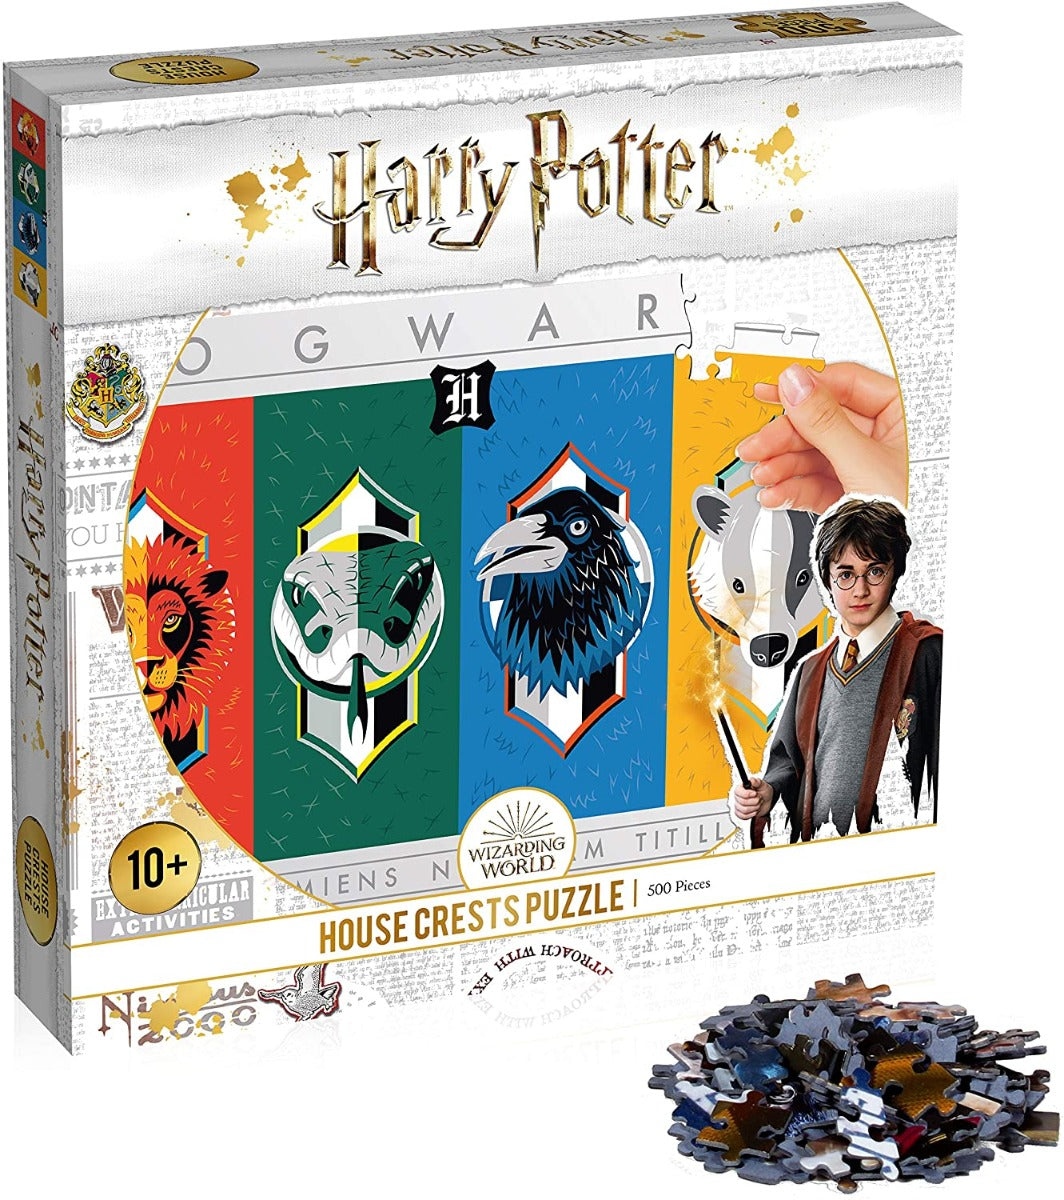 Winning Movies - Harry Potter House Crests - 500 Piece Jigsaw Puzzle